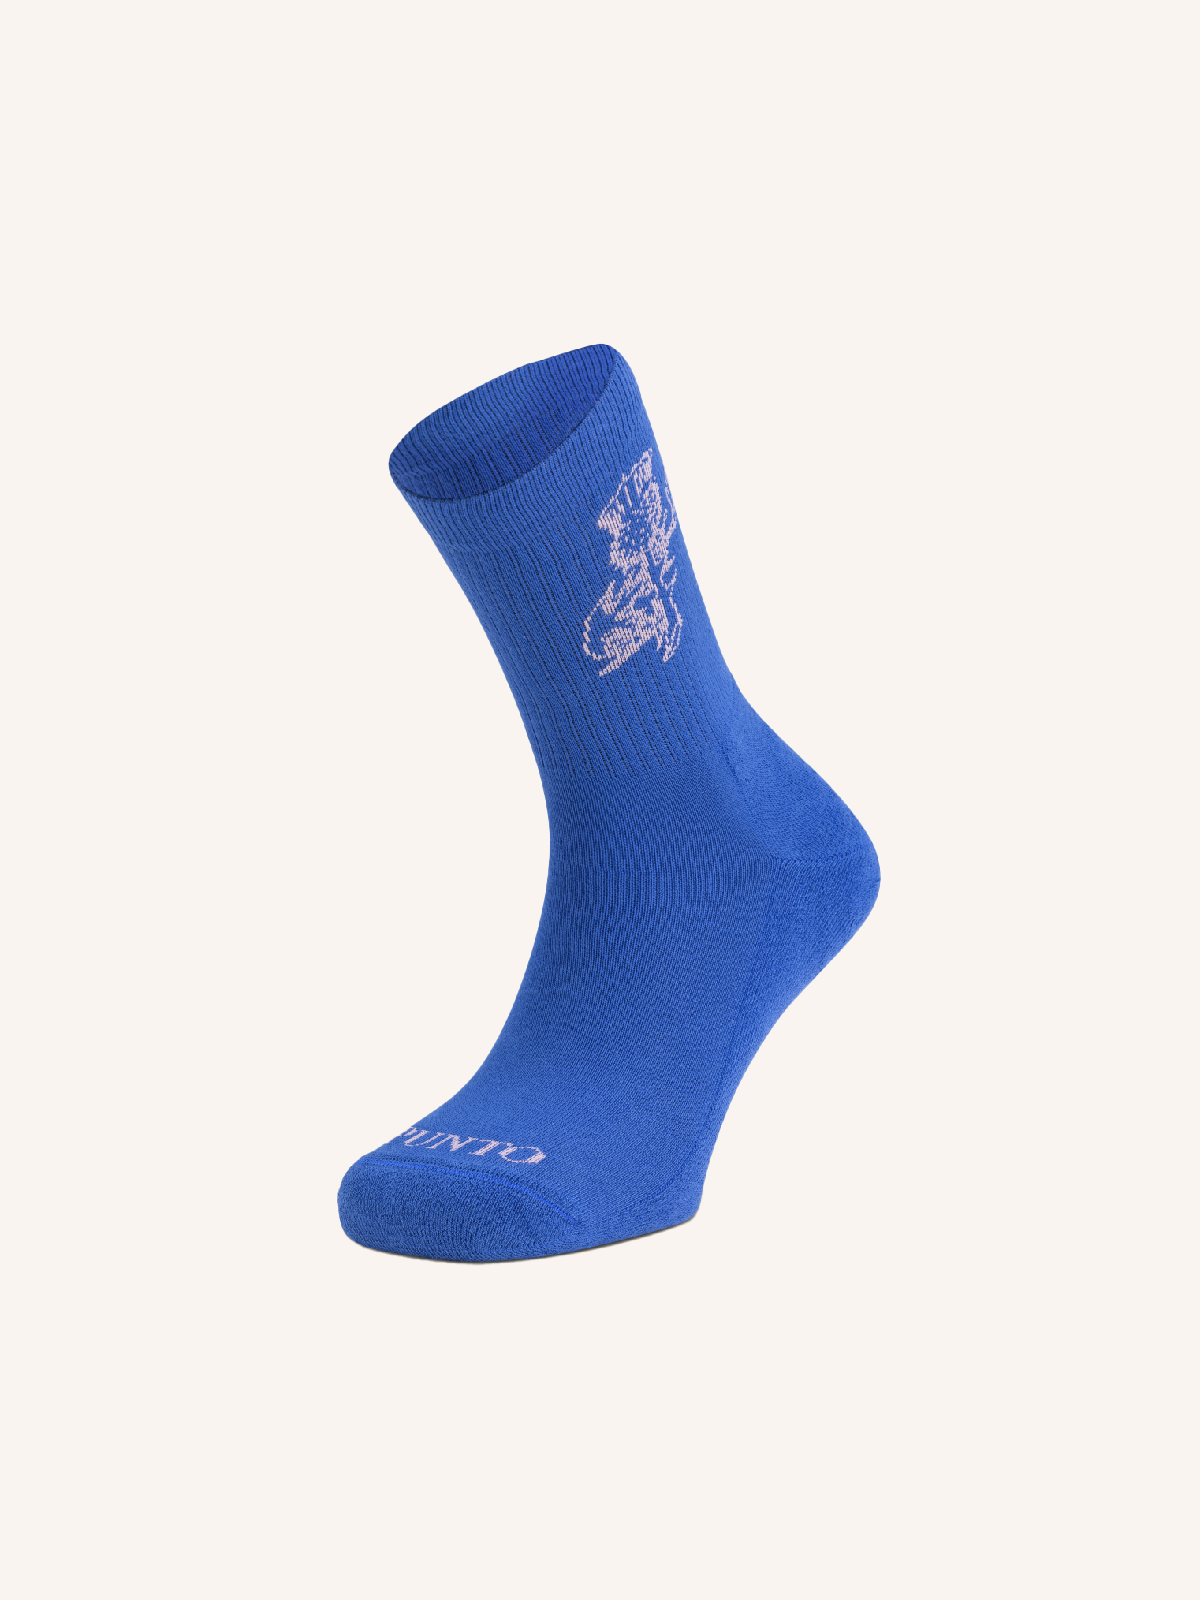 Short Sock with Thistle Embroidery for Men | Patterned | Pack of 3 Pairs | Iconic UC